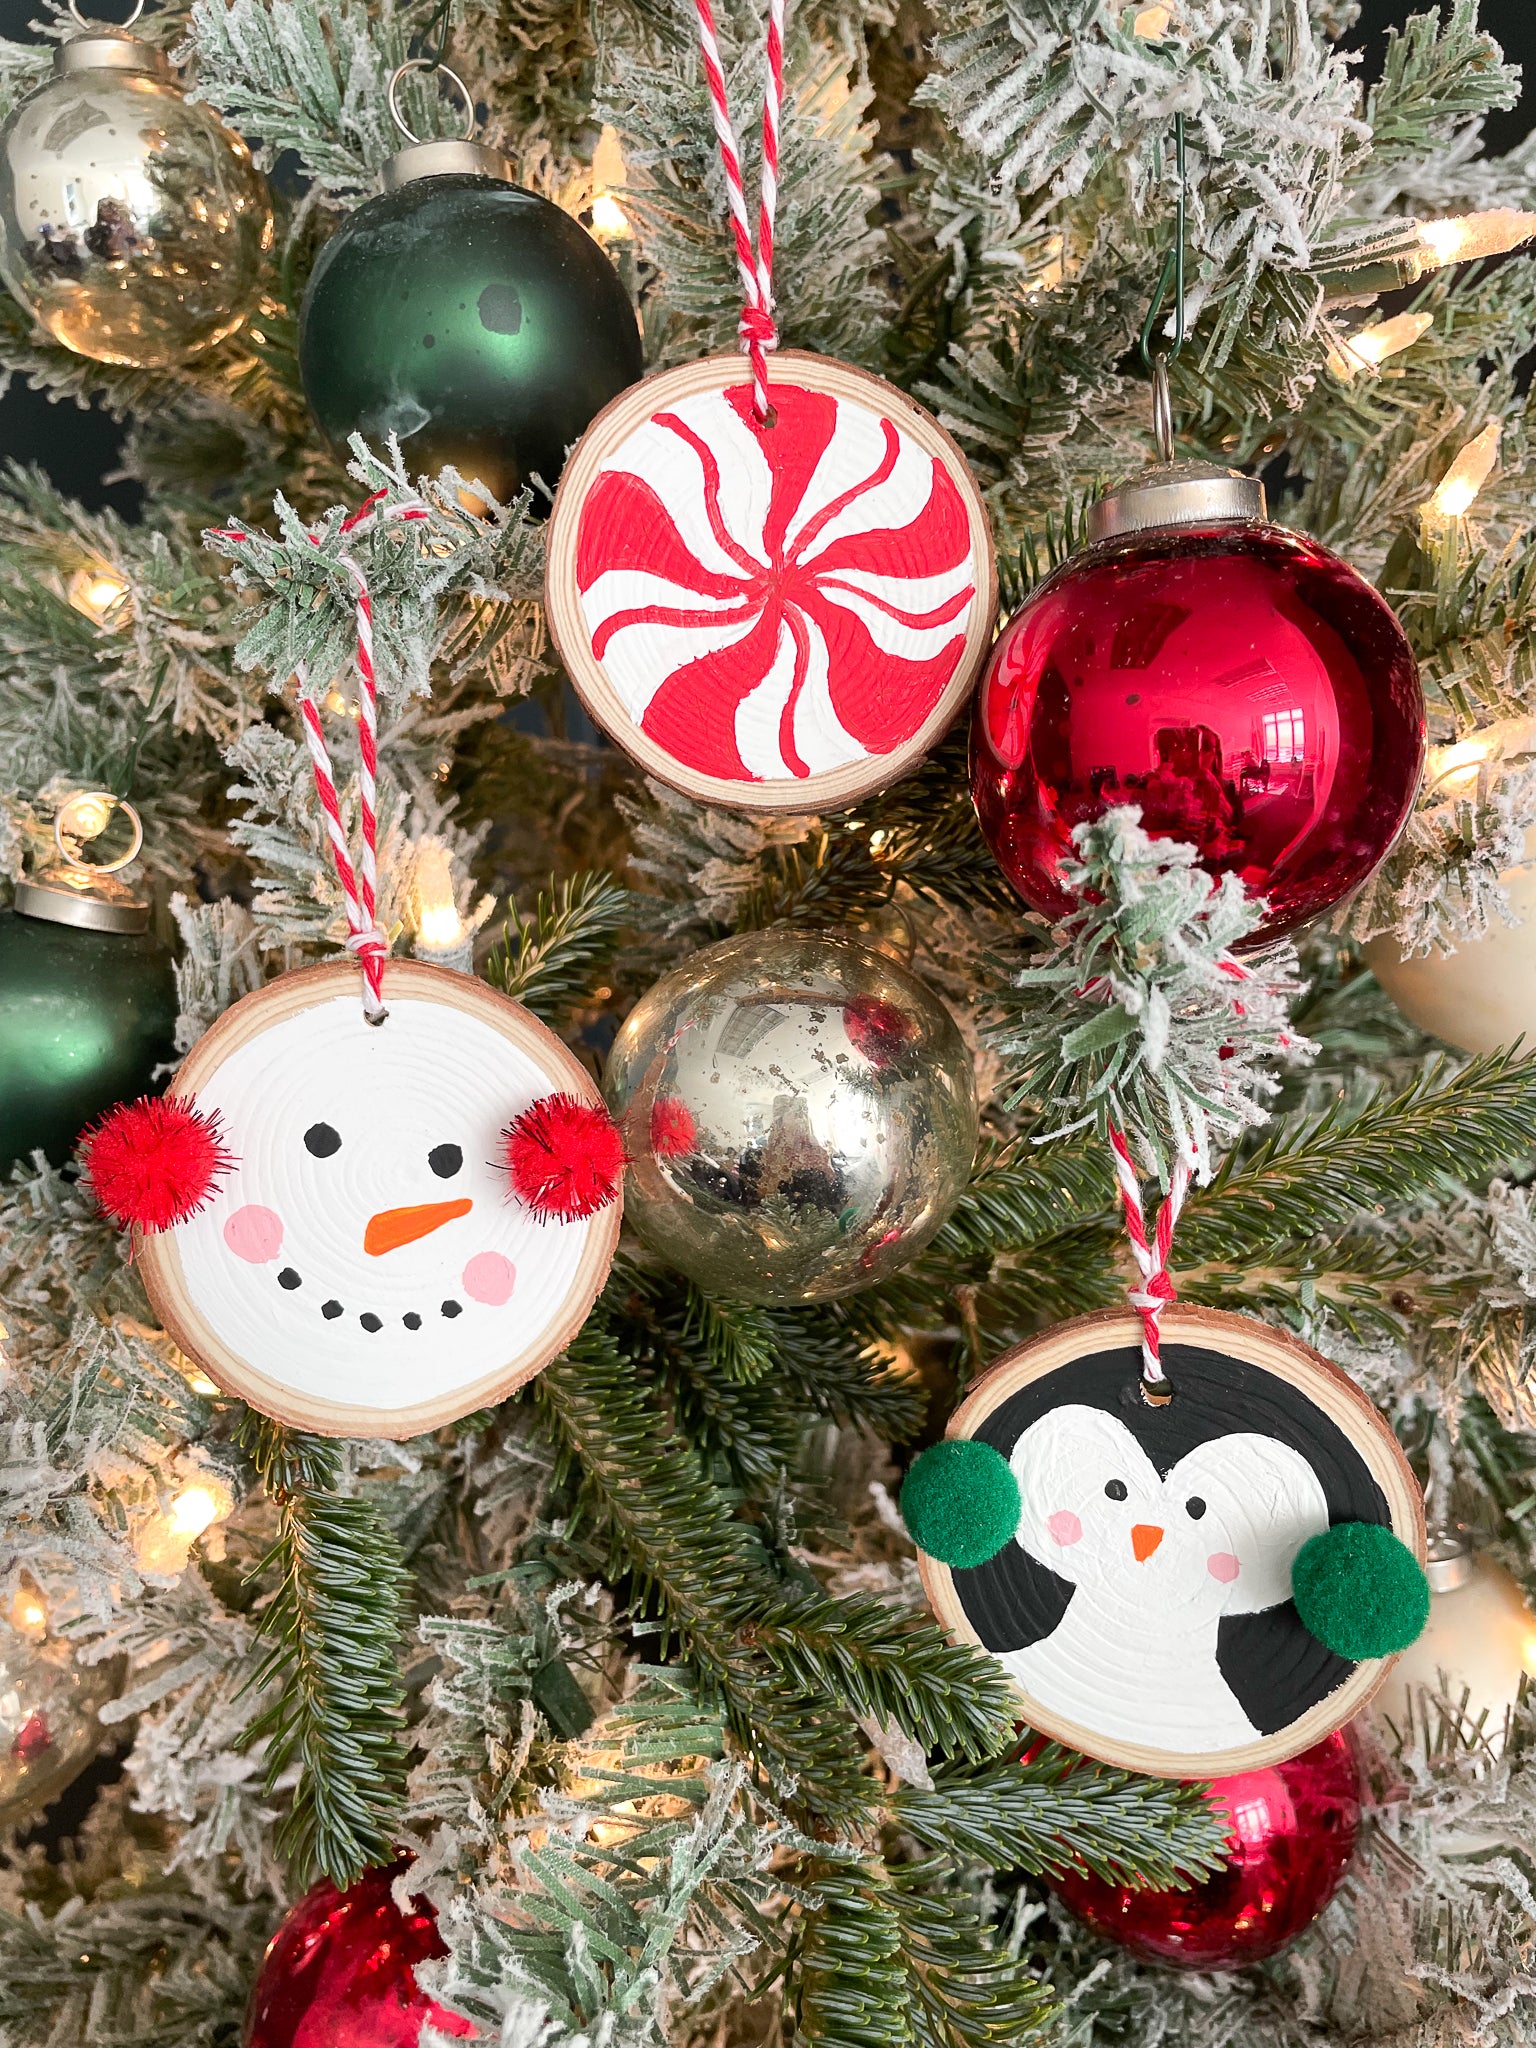 Paint Your Own Wooden Christmas Ornaments – itemstudiollc